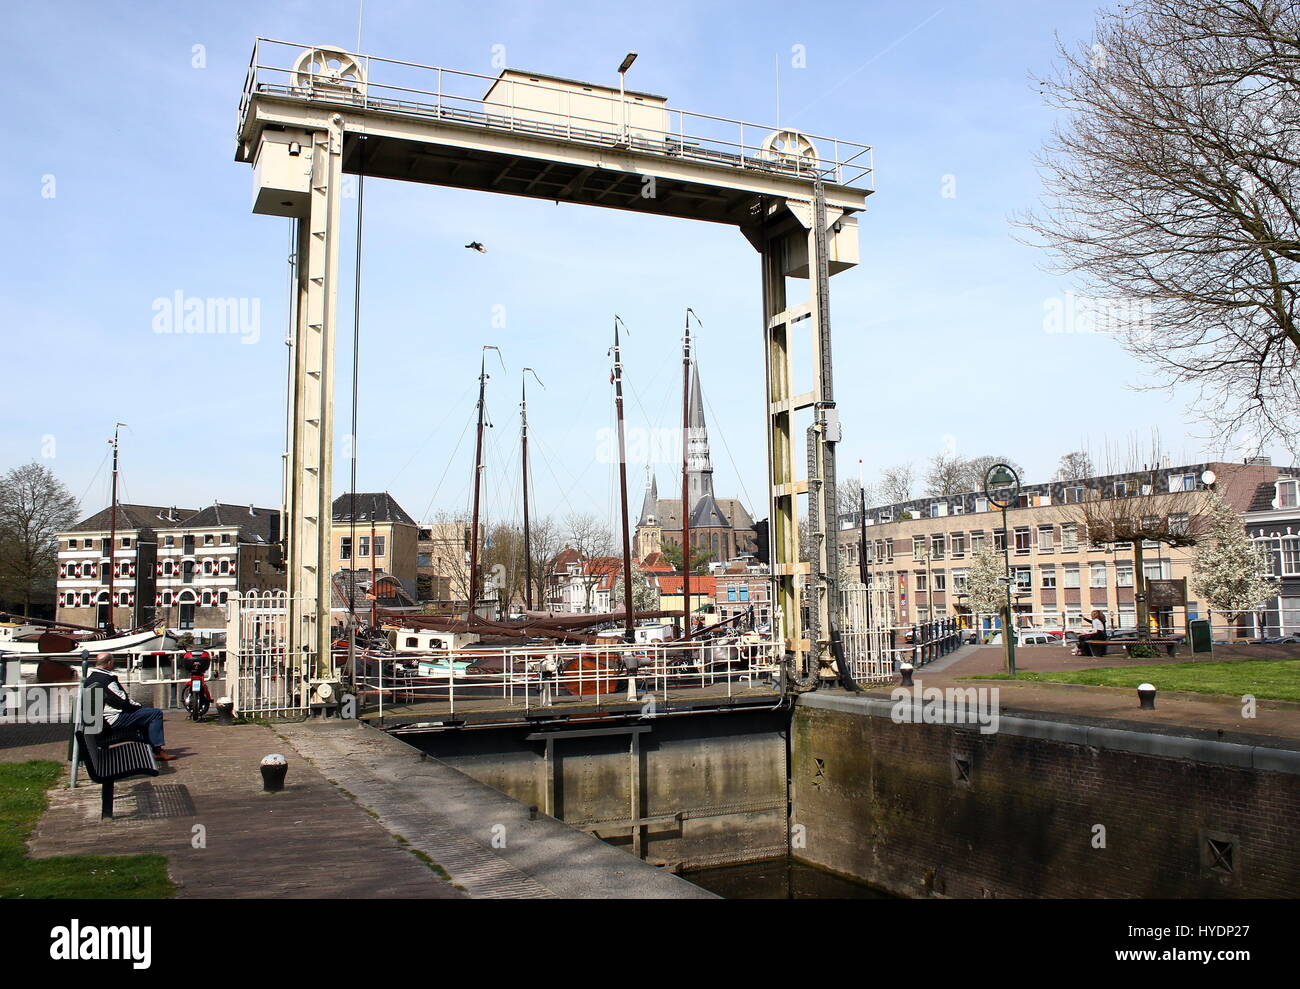 Medieval Mallegatsluis Lock in central Gouda, Netherlands, sluice gate from the late 19th century Stock Photo